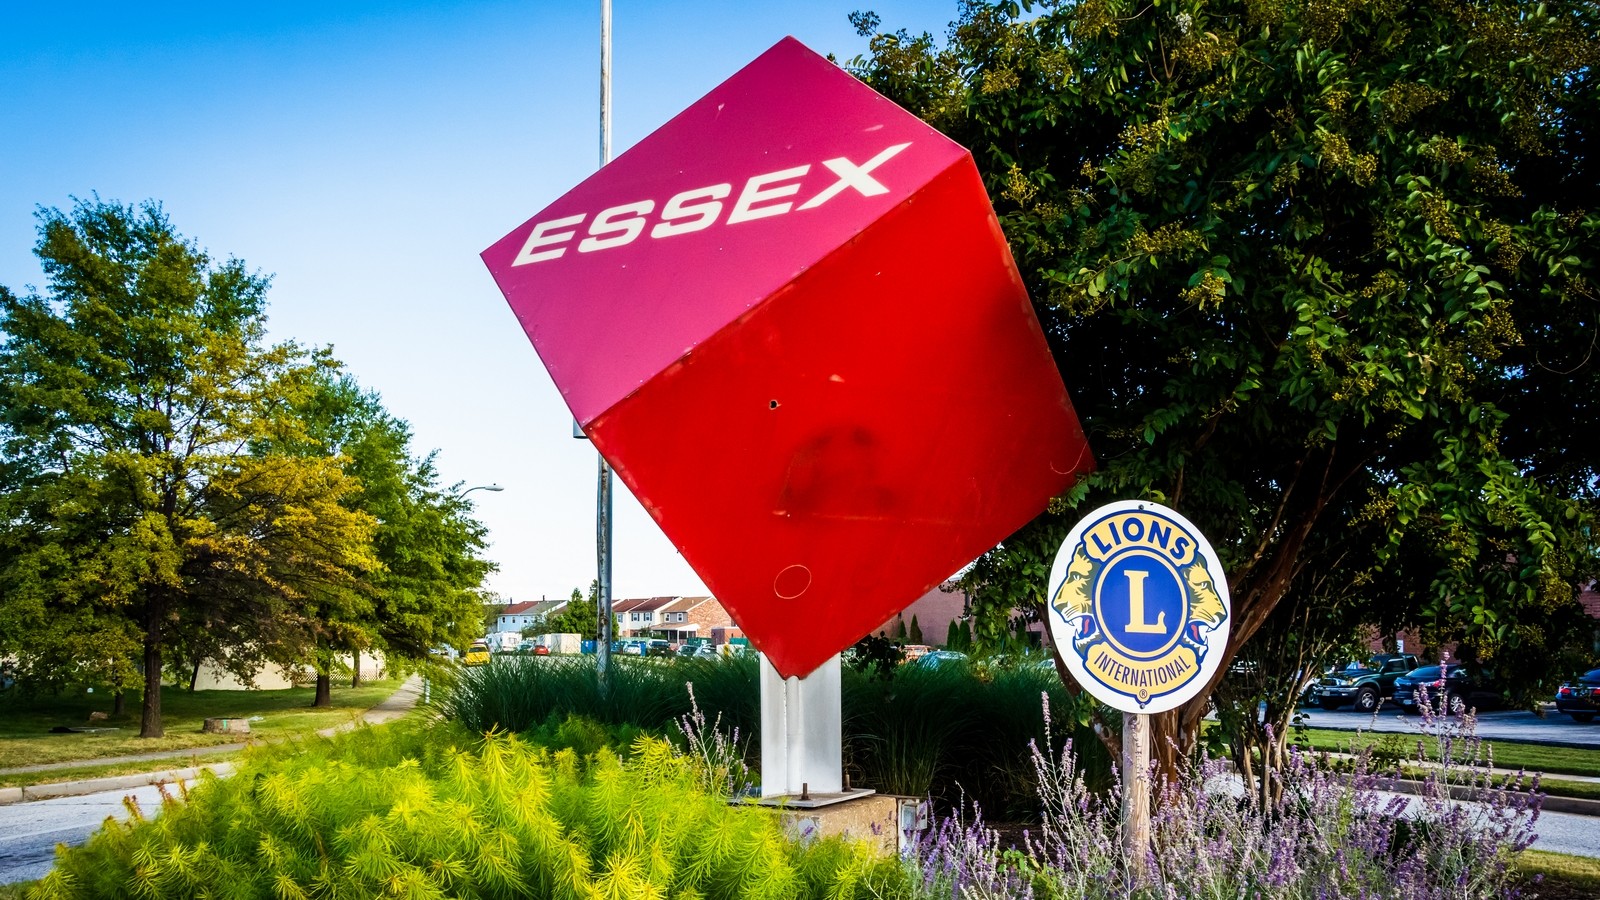 The Essex Cube in Essex, Maryland.